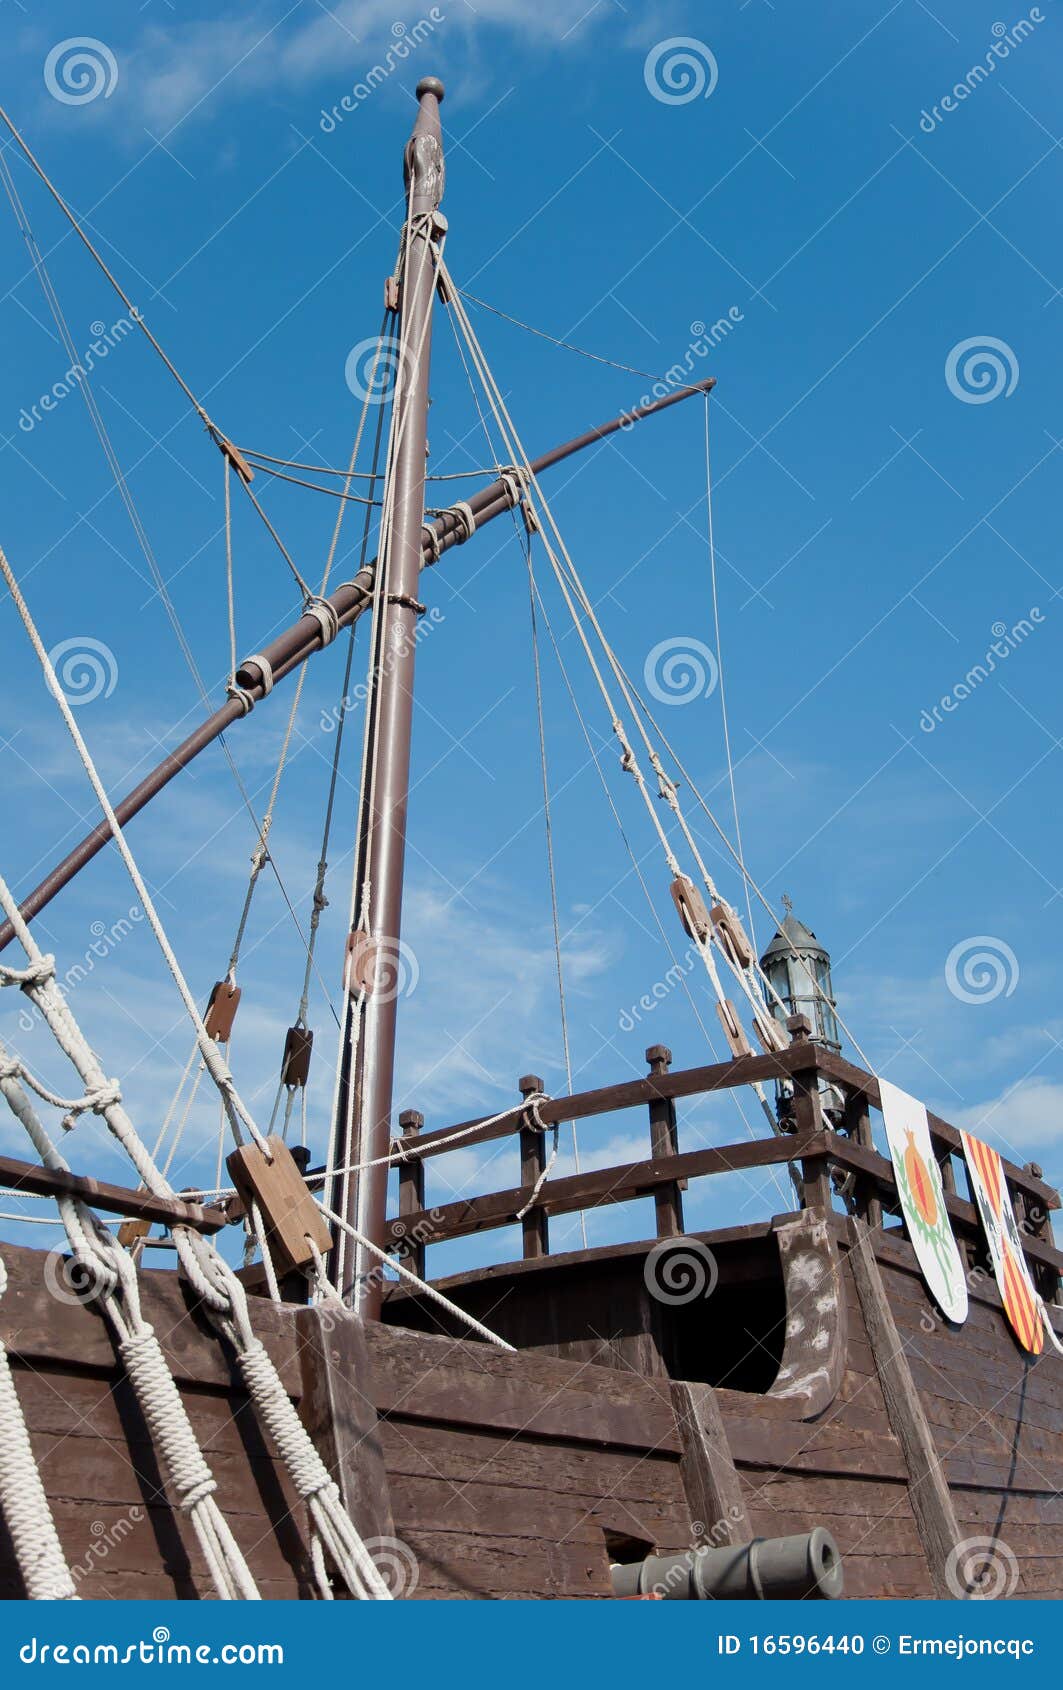 stern of the replica of a columbus's ship